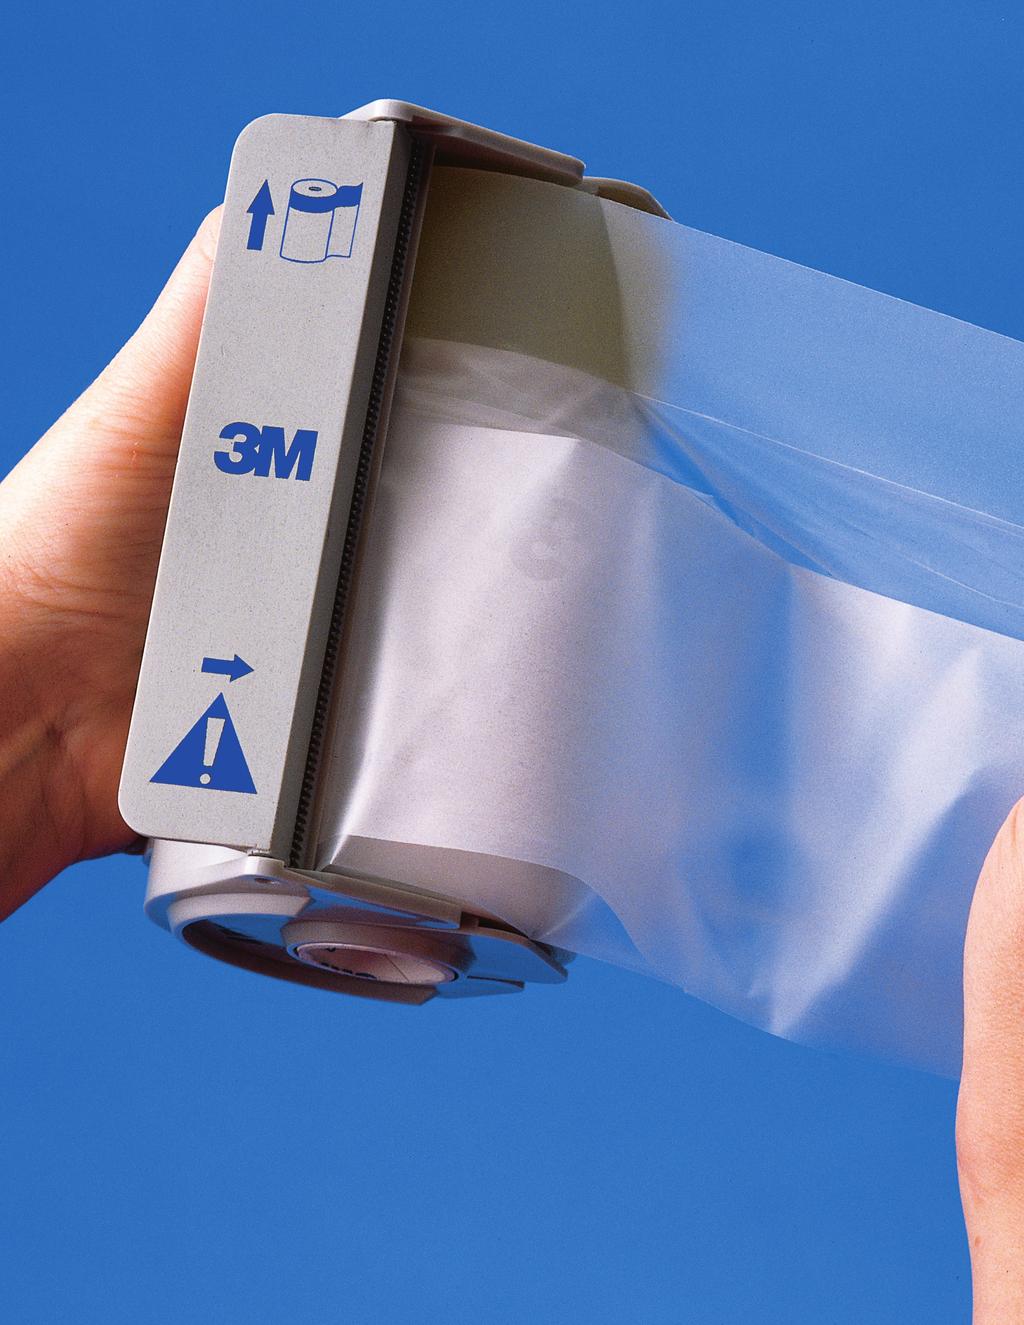 SAFETY ISSUES Before use: Always inspect drape dispenser to ensure proper functioning.